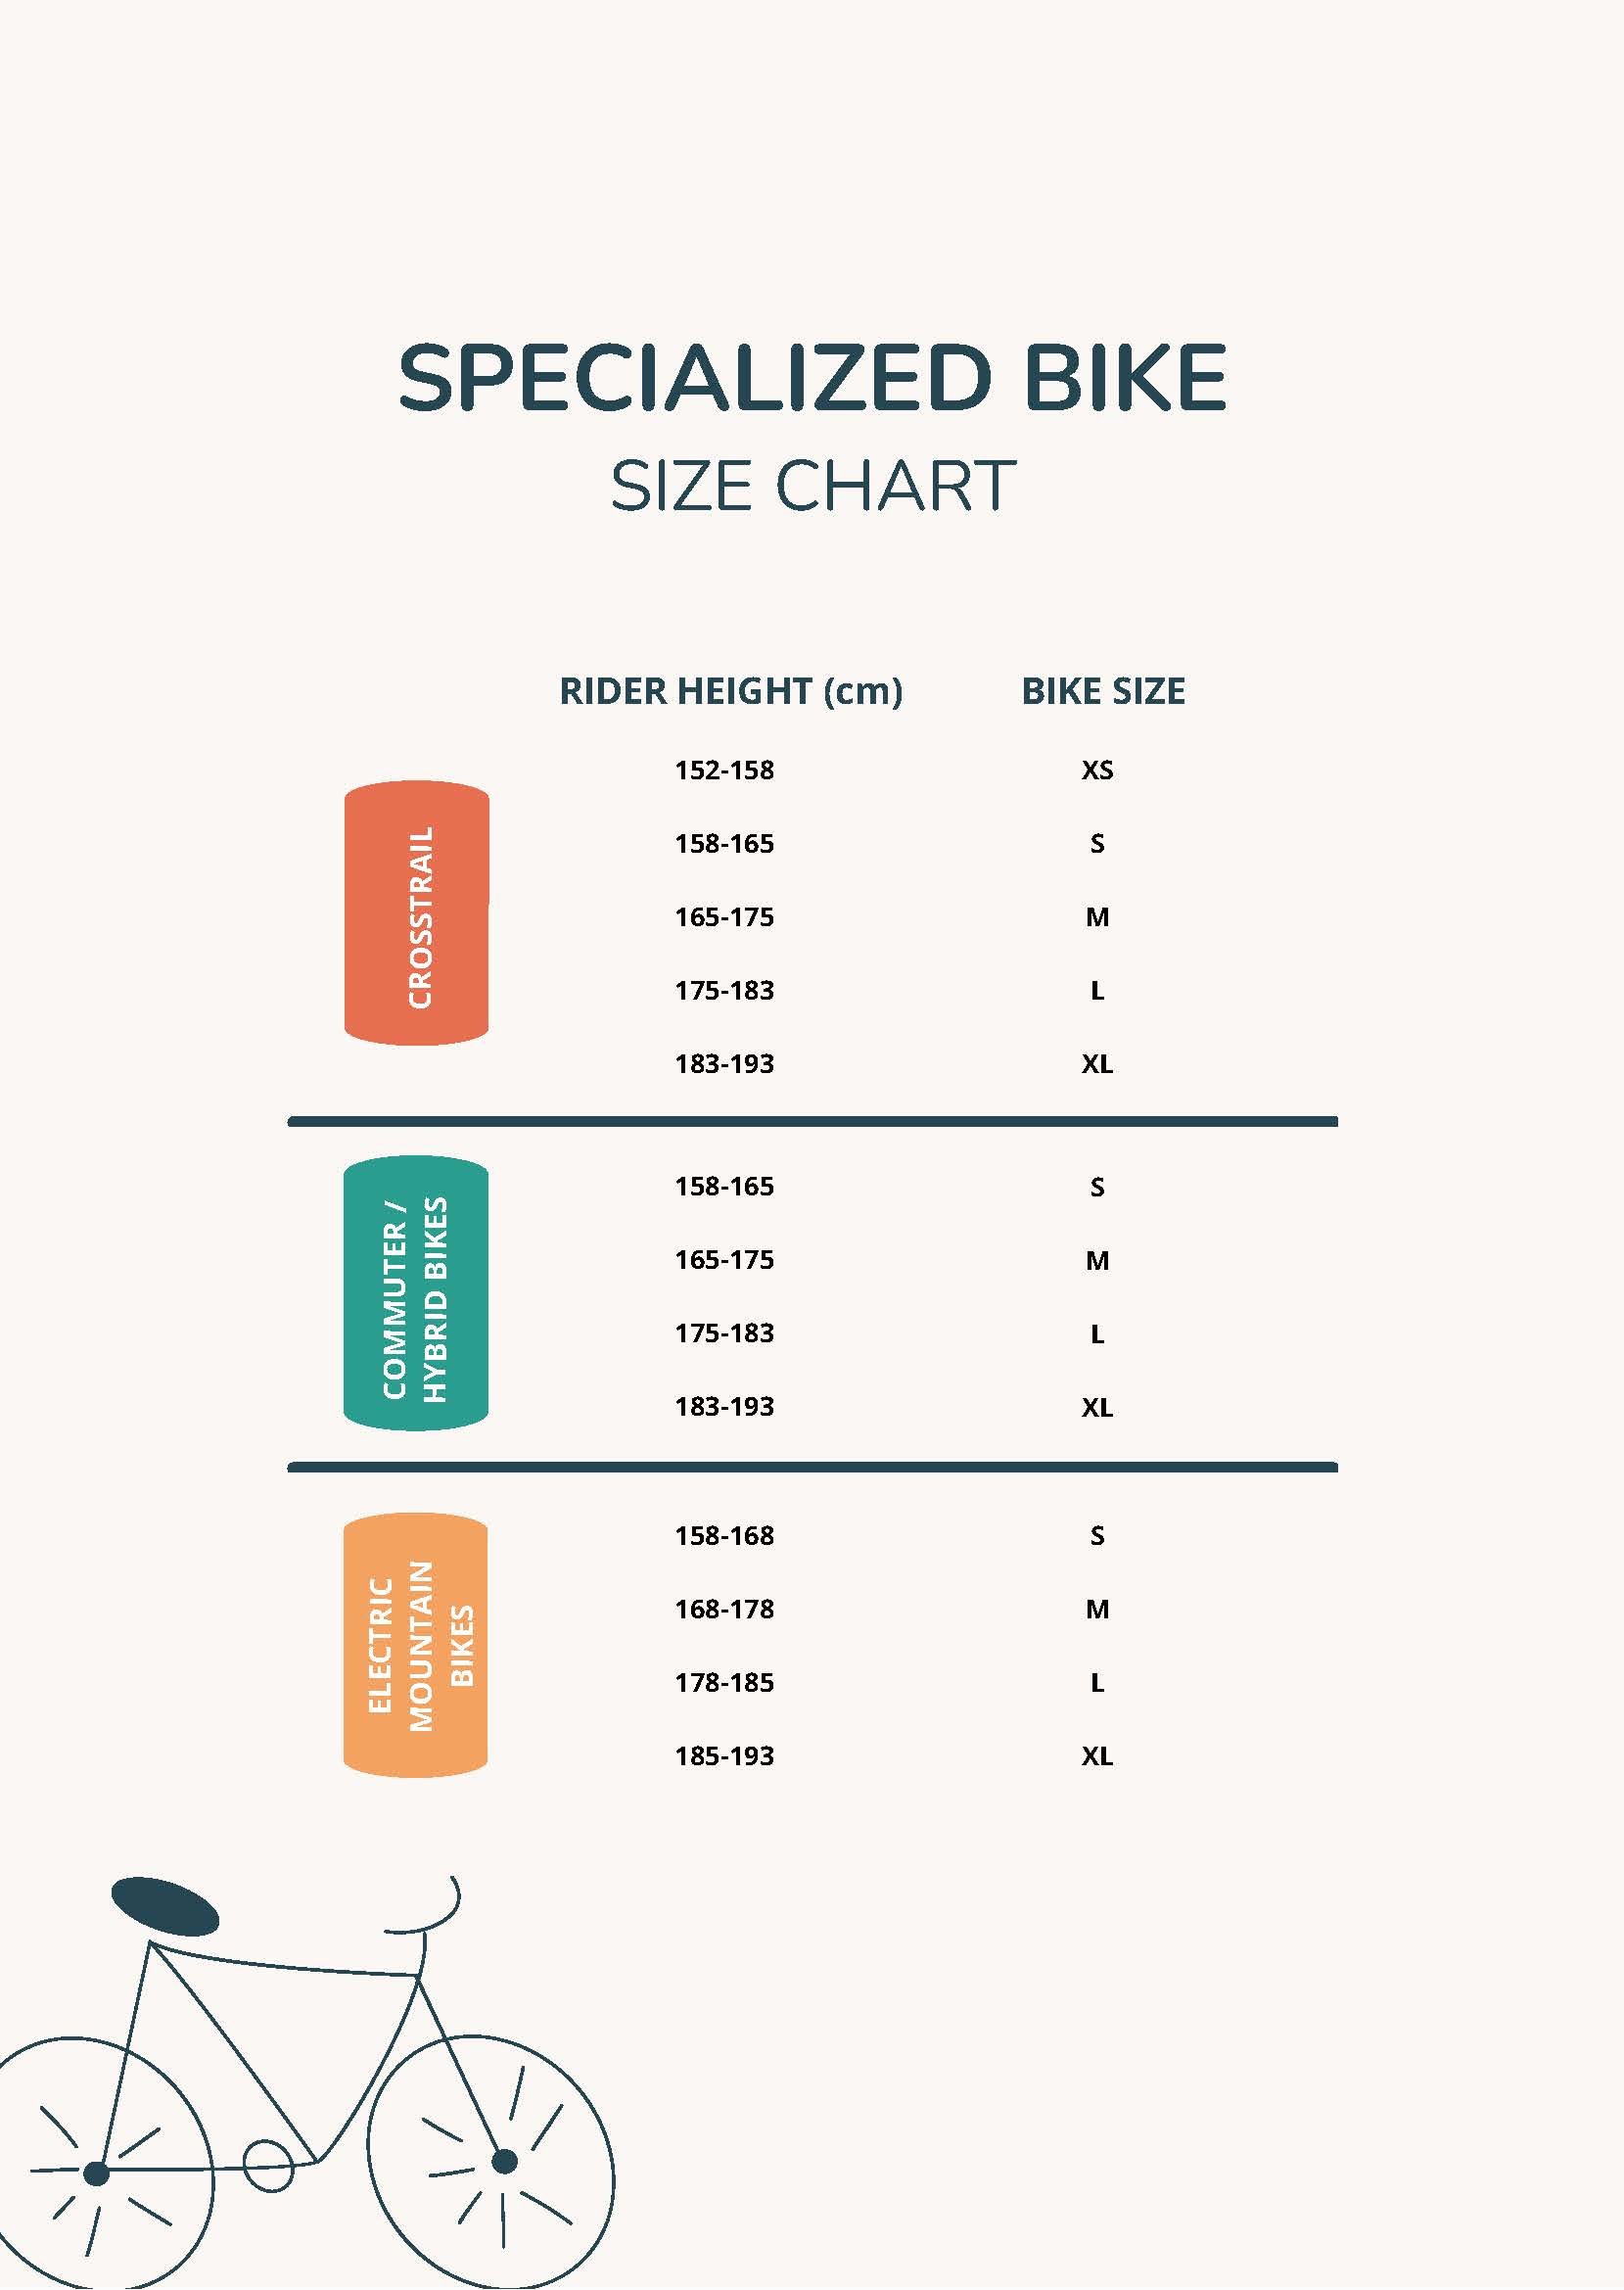 Bike Size Charts Templates Design, Free, Download Bicycle Size Chart